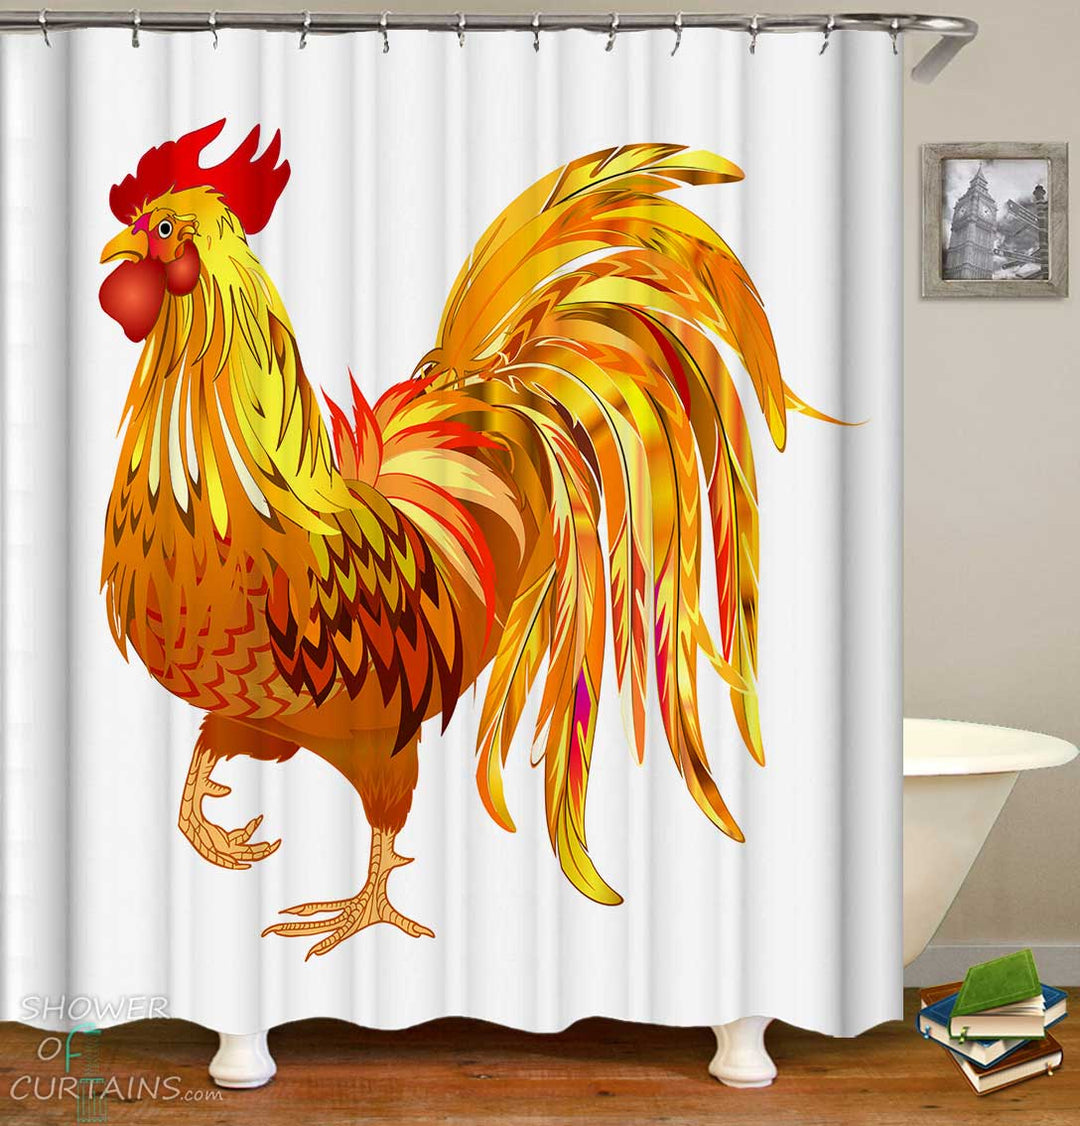 Shower Curtains with Rooster